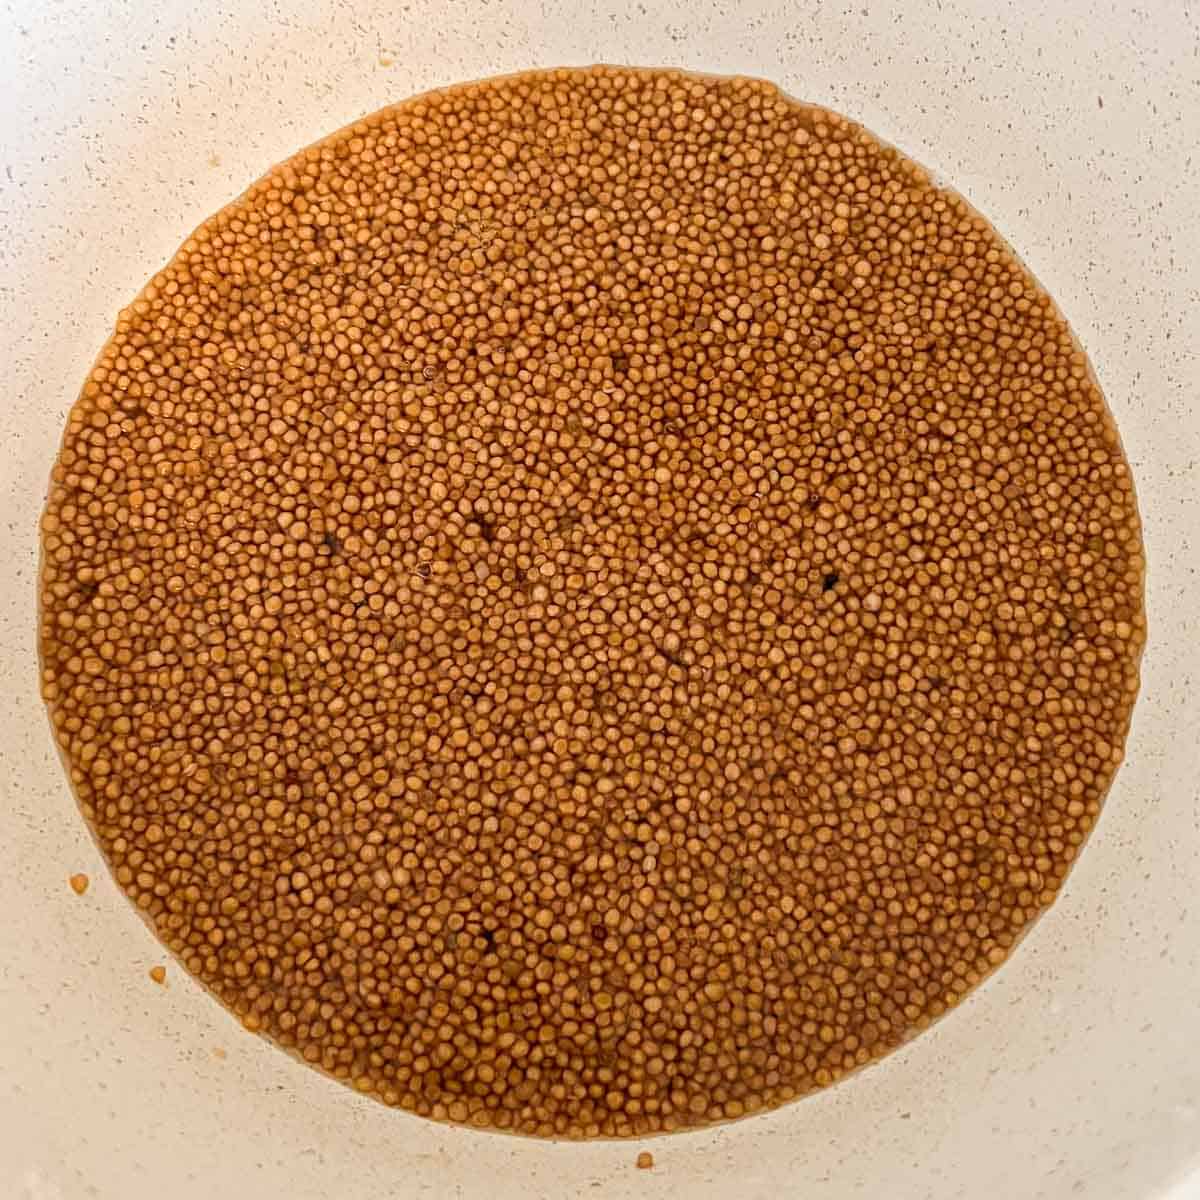 seeds after cooking